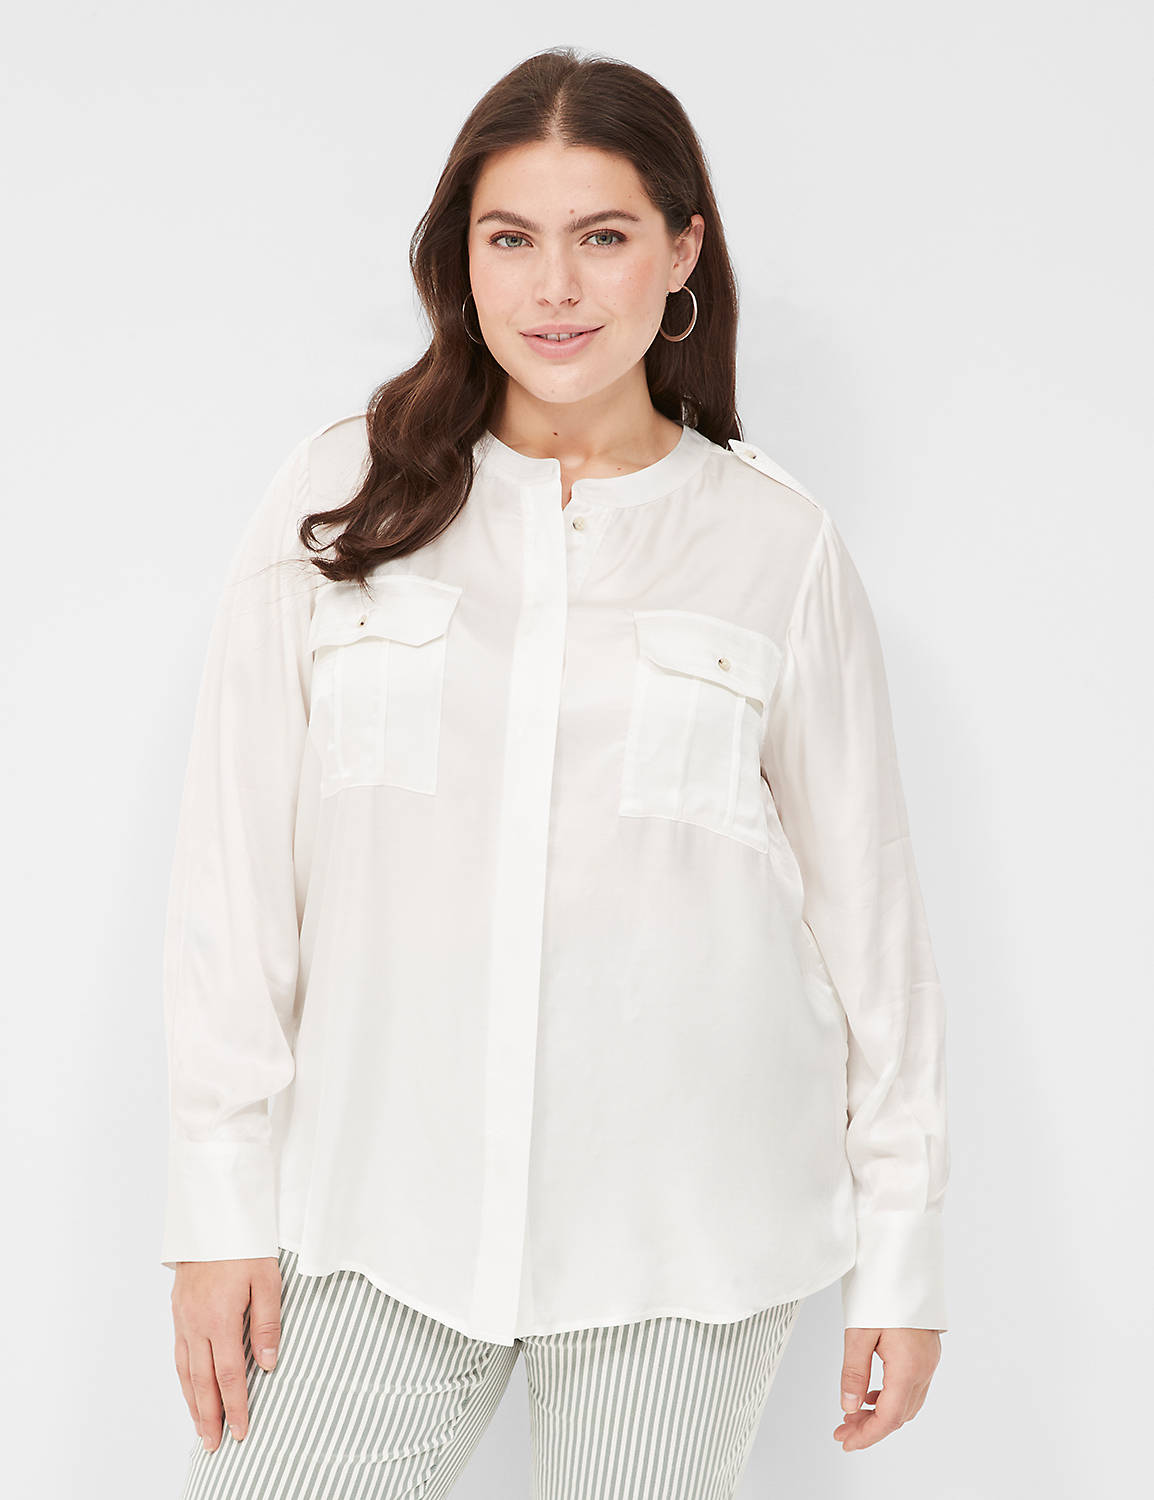 Relaxed LS Button Front Blouse 1138 Product Image 1